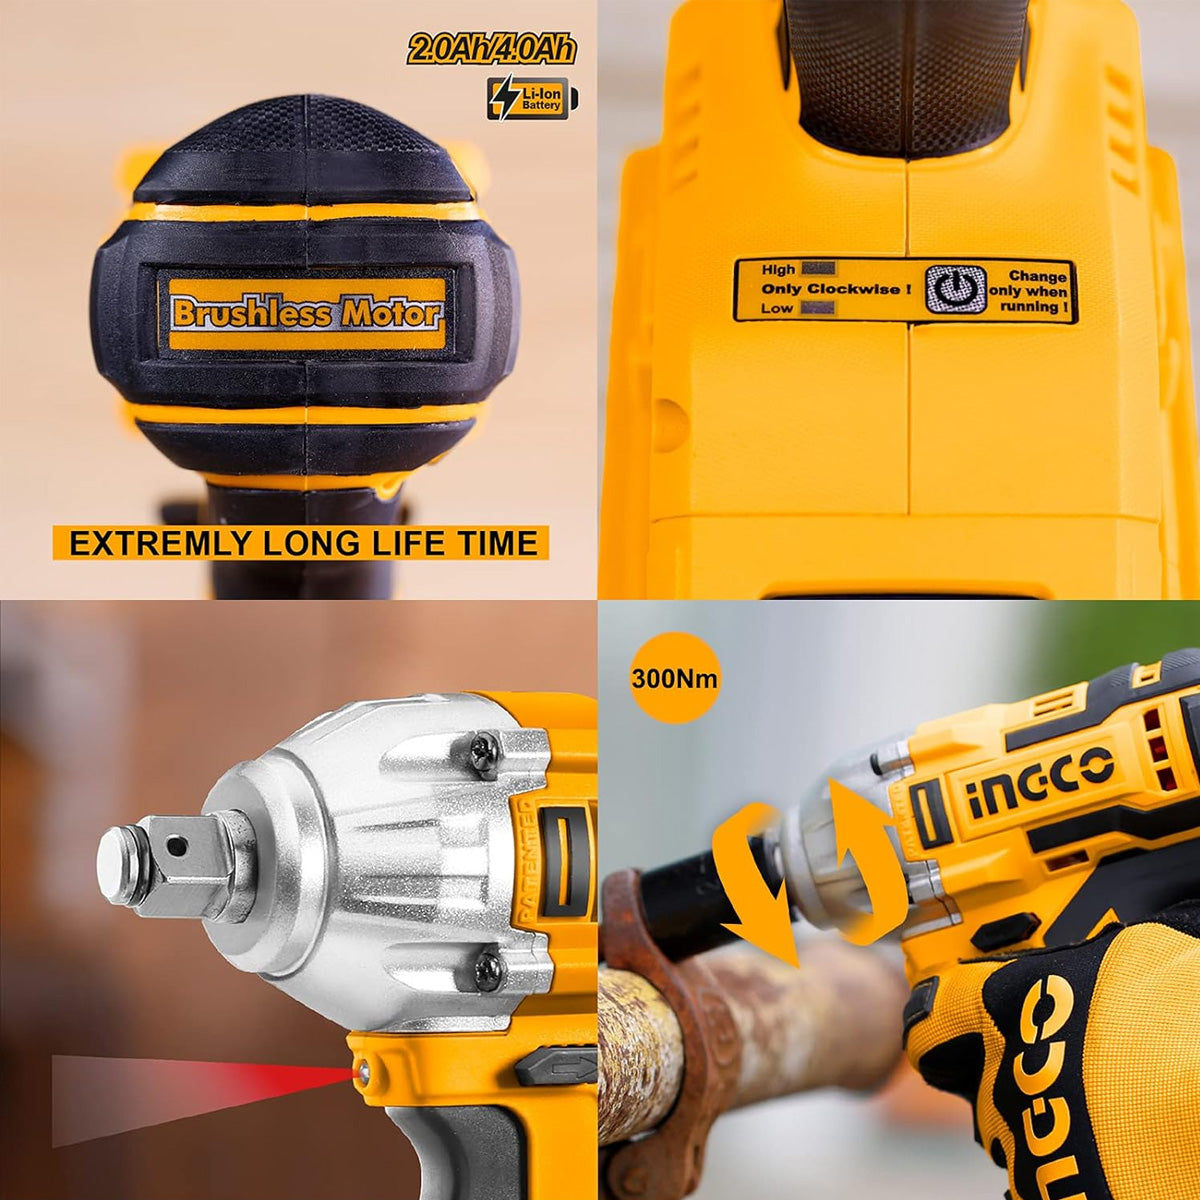 Ingco CIWLI2001 20V Cordless Impact Wrench - 3300 RPM, 300NM Max Torque, Brushless Motor, LED, 2 Batteries & Charger